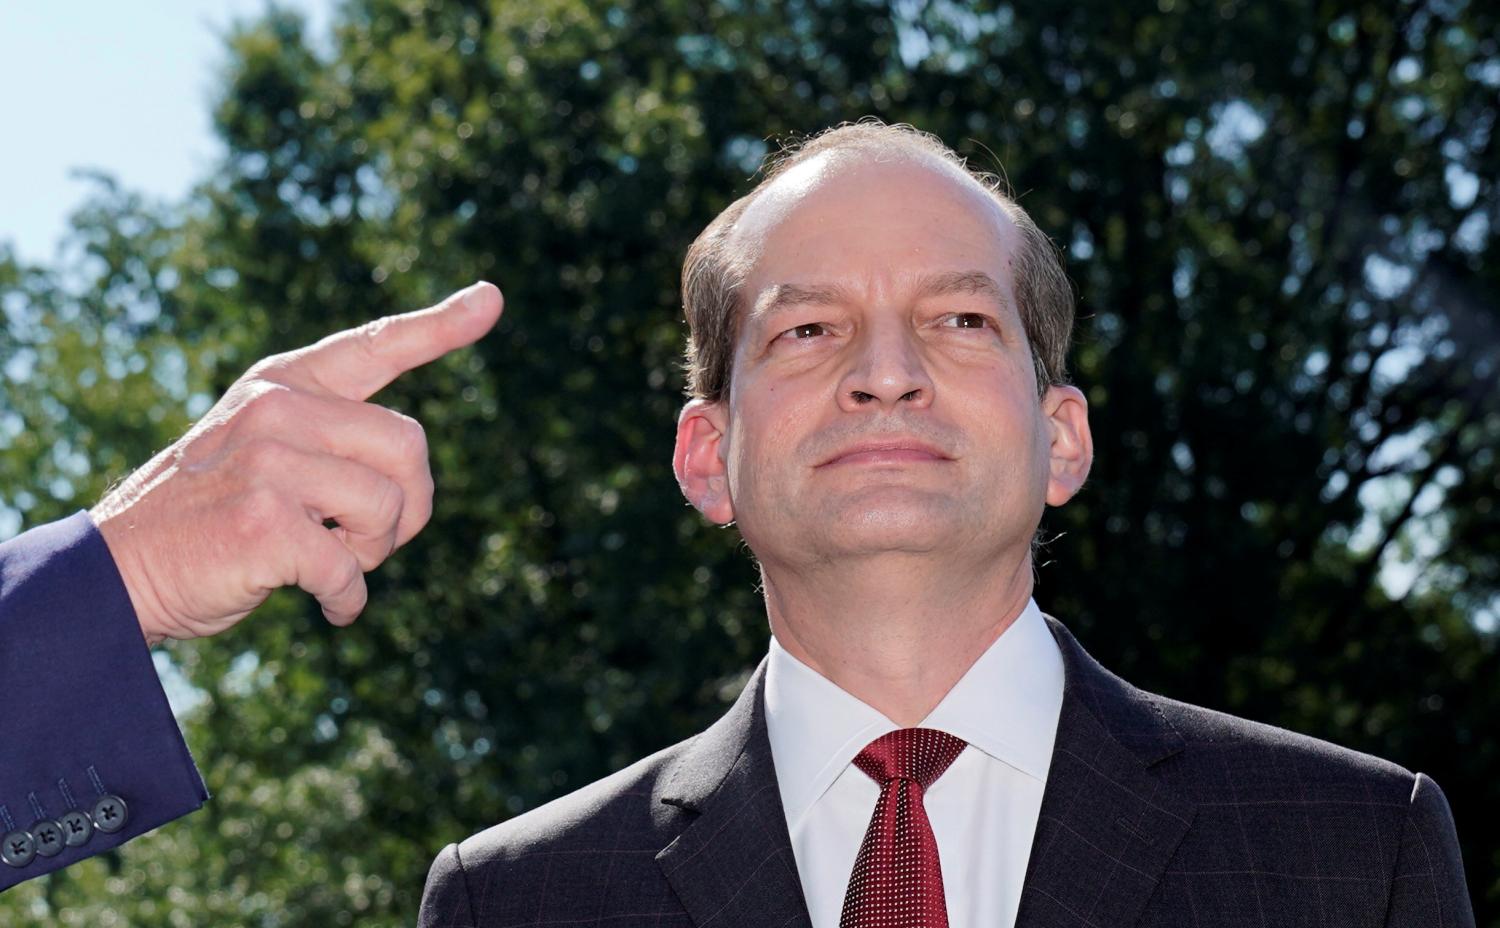 U.S.Labor Secretary Alex Acosta listens as U.S. President Donald Trump announces Acosta's resignation before the president departed for travel to Milwaukee, Wisconsin from the South Lawn of the White House in Washington, U.S., July 12, 2019. REUTERS/Kevin Lamarque?? - RC11300D1CC0